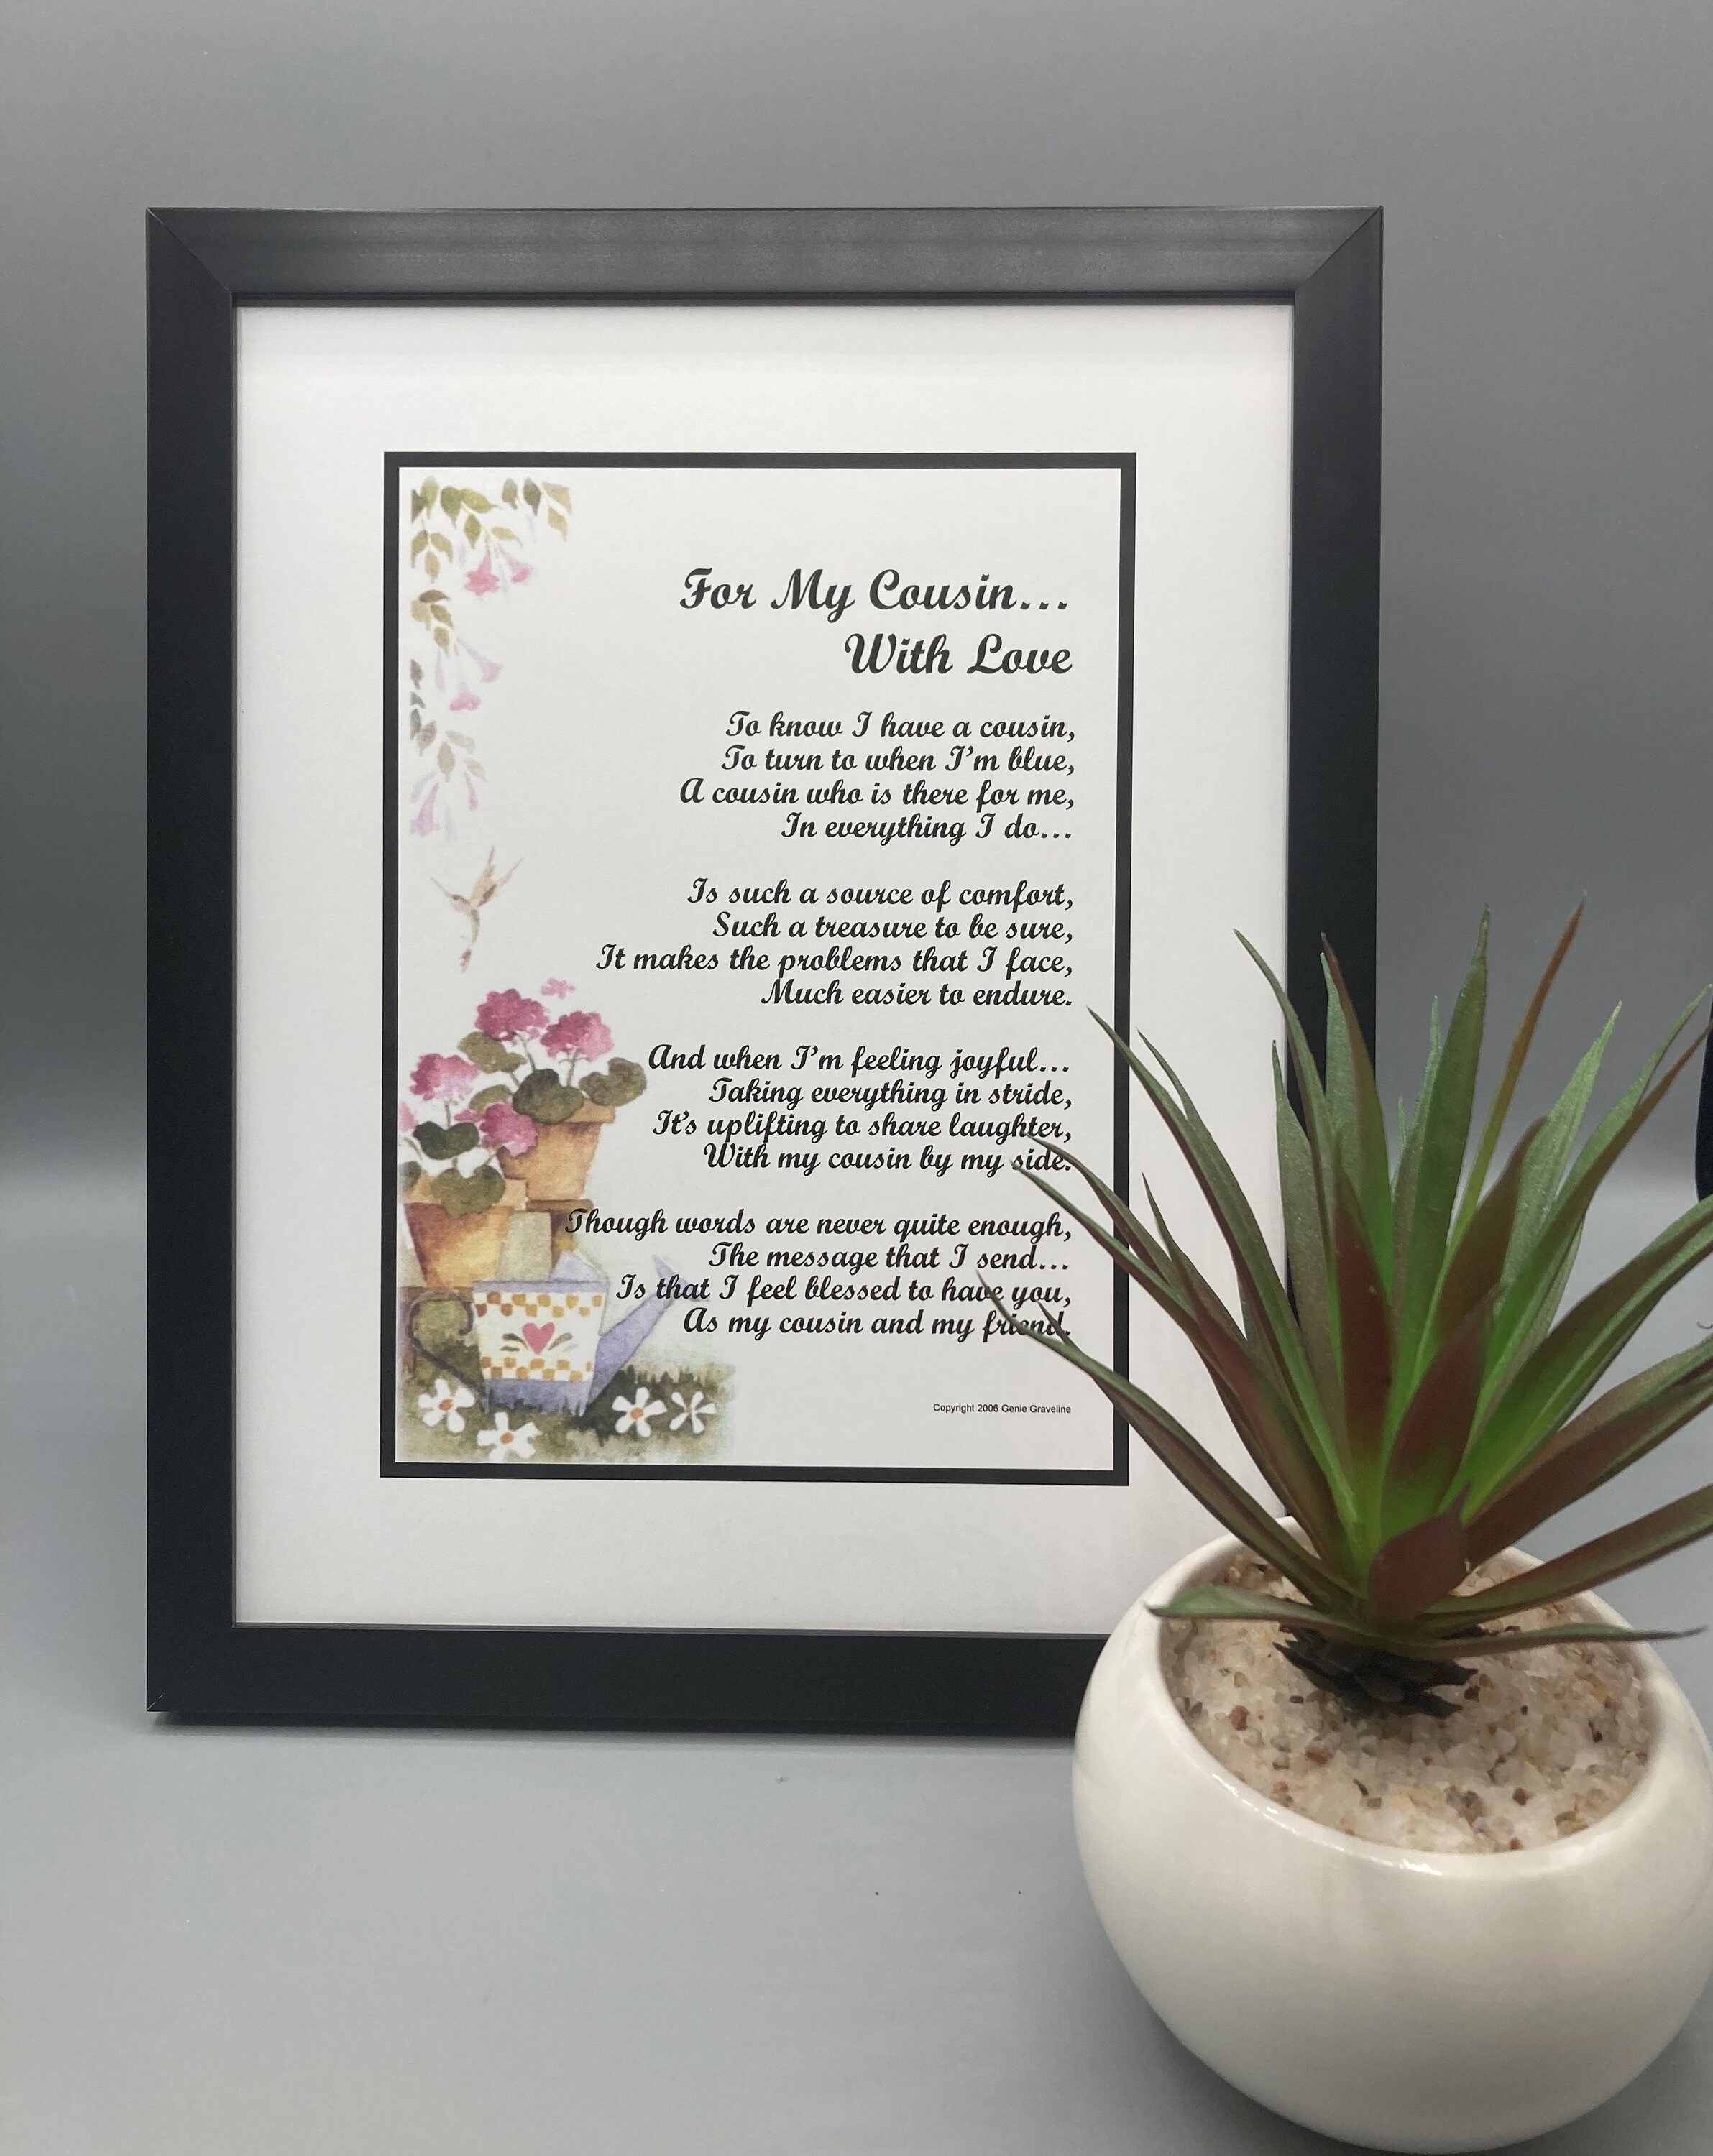 Framed 8x10 Poem for A Special Cousin Cousin Verse Cousin pic image